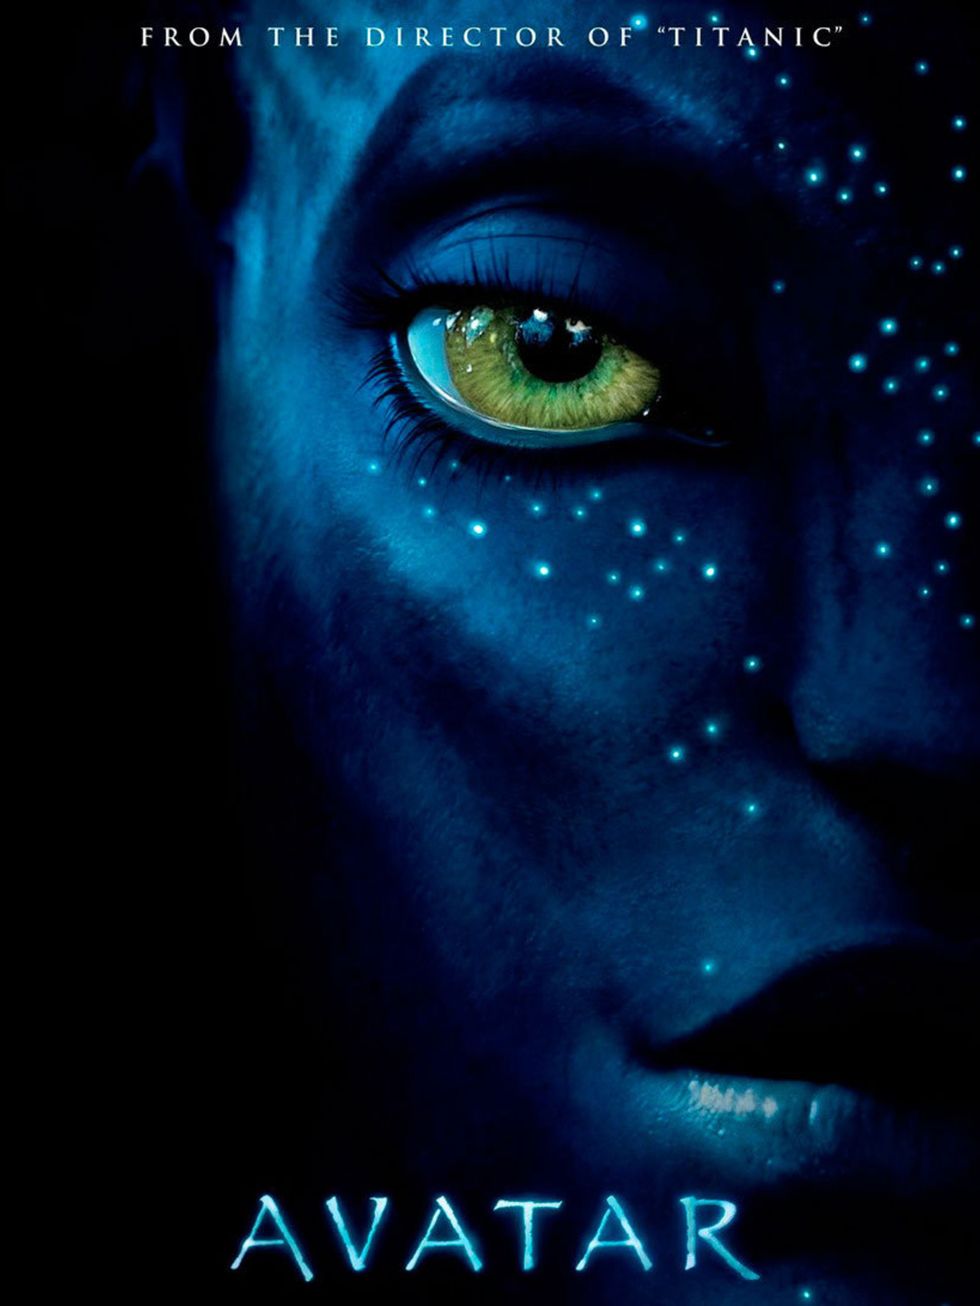 <p><strong>Avatar</strong></p><p>Debatable. There are fleeting words between the Na'vi women, but all substantial conversations involve them discussing Jake (Sam Worthington).</p><p>SCORE: 0/3</p><p><a href="https://itunes.apple.com/gb/app/elle-magazine-u